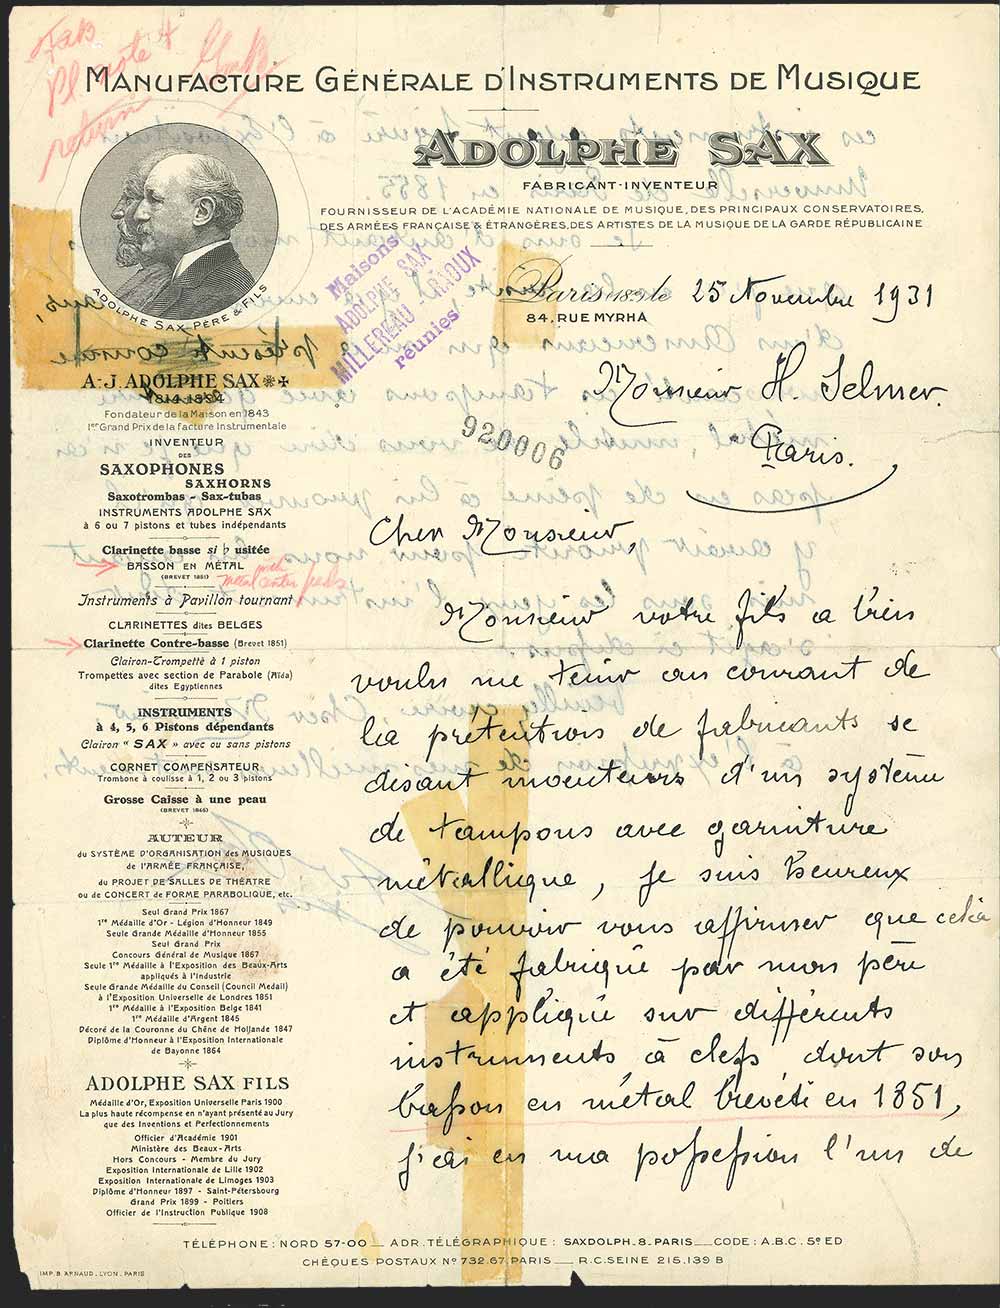 An archival piece of paper with both printed and hand written writing.